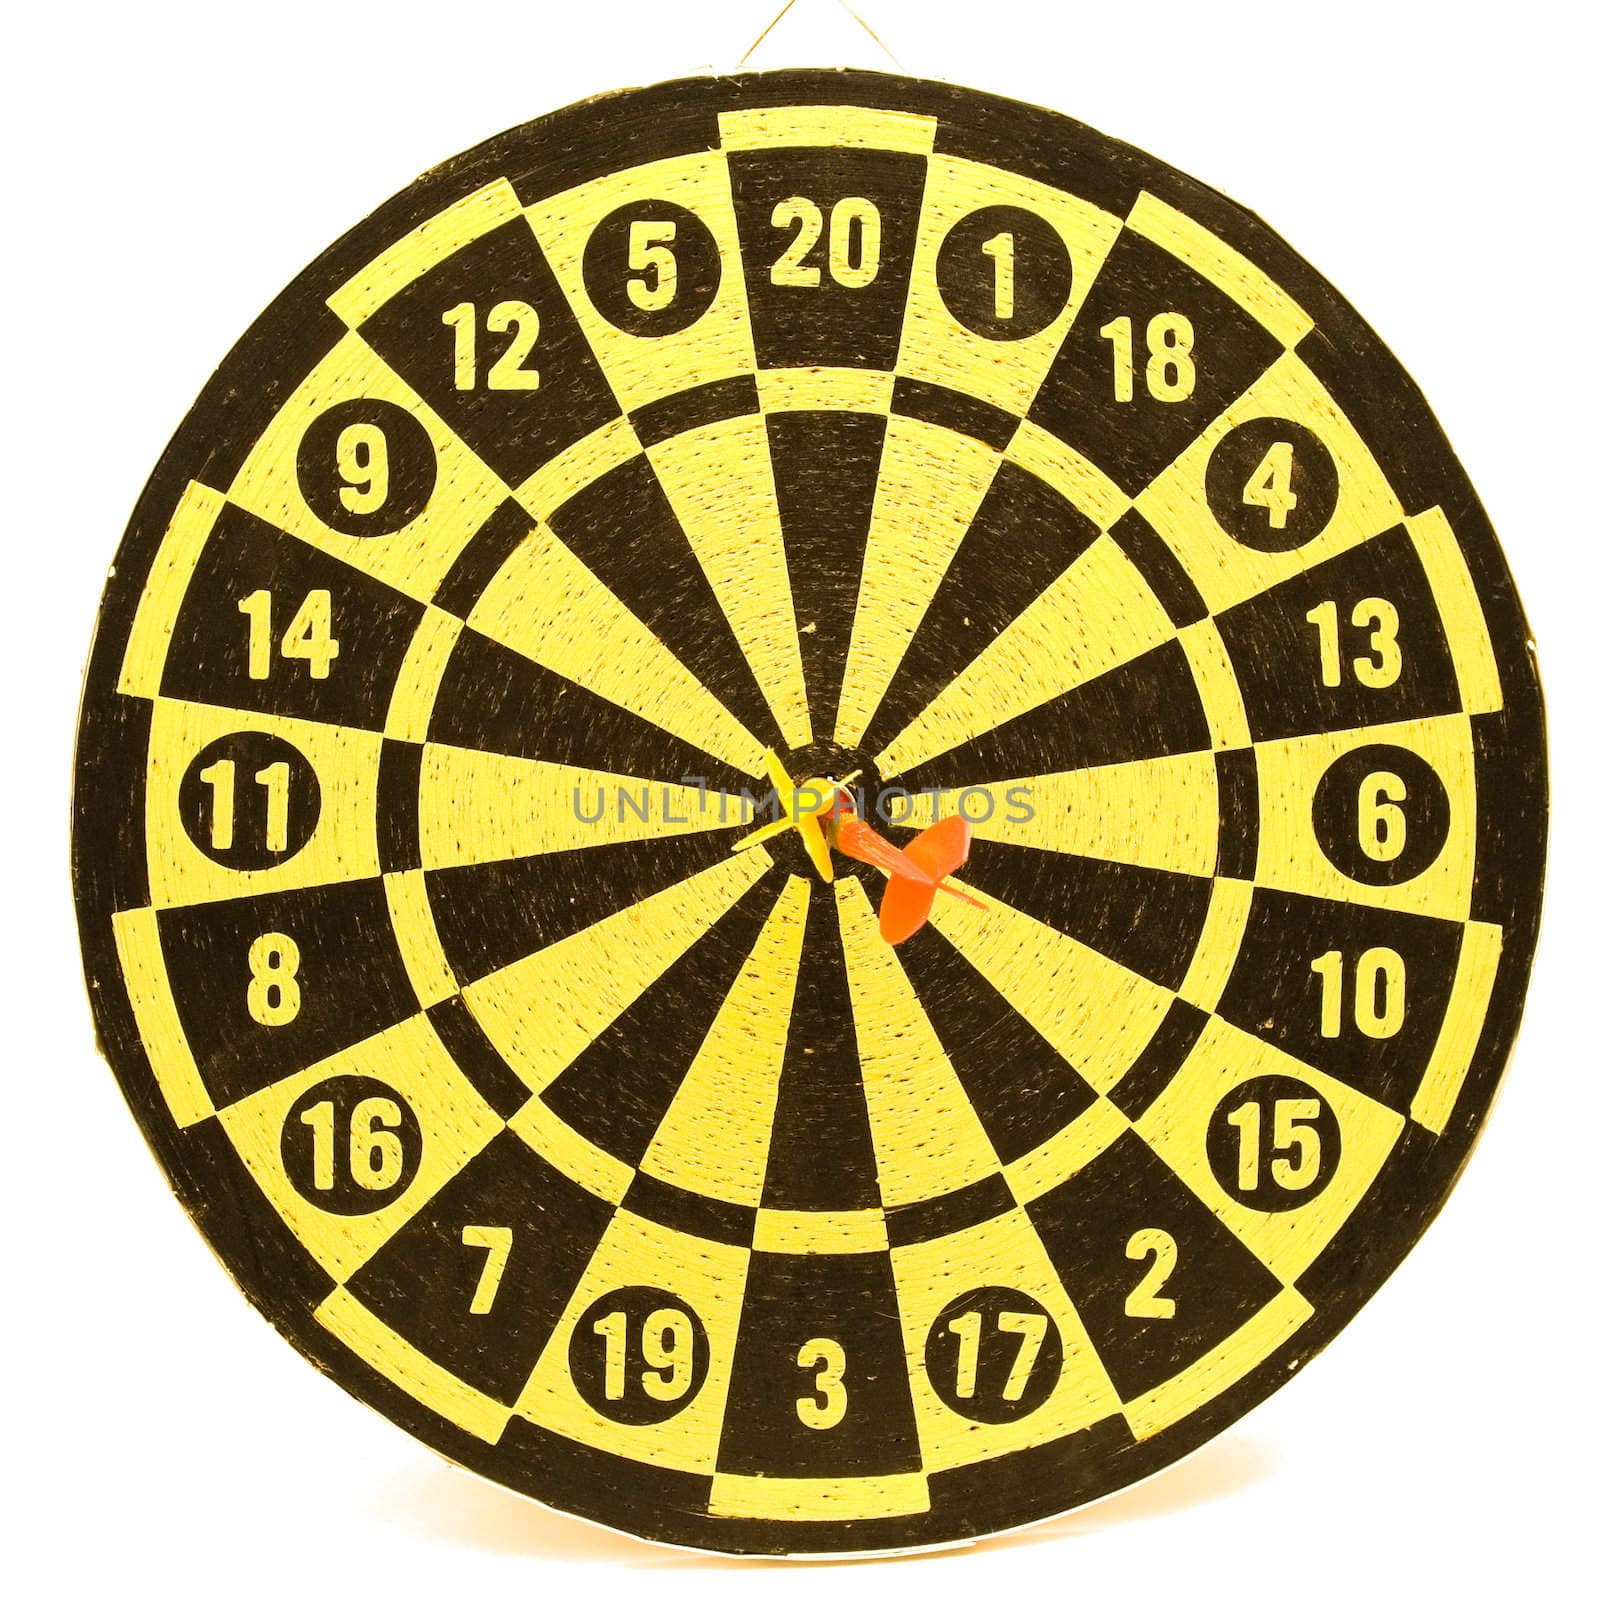 Bullseye Dart in a dartboard, isolated against a white background